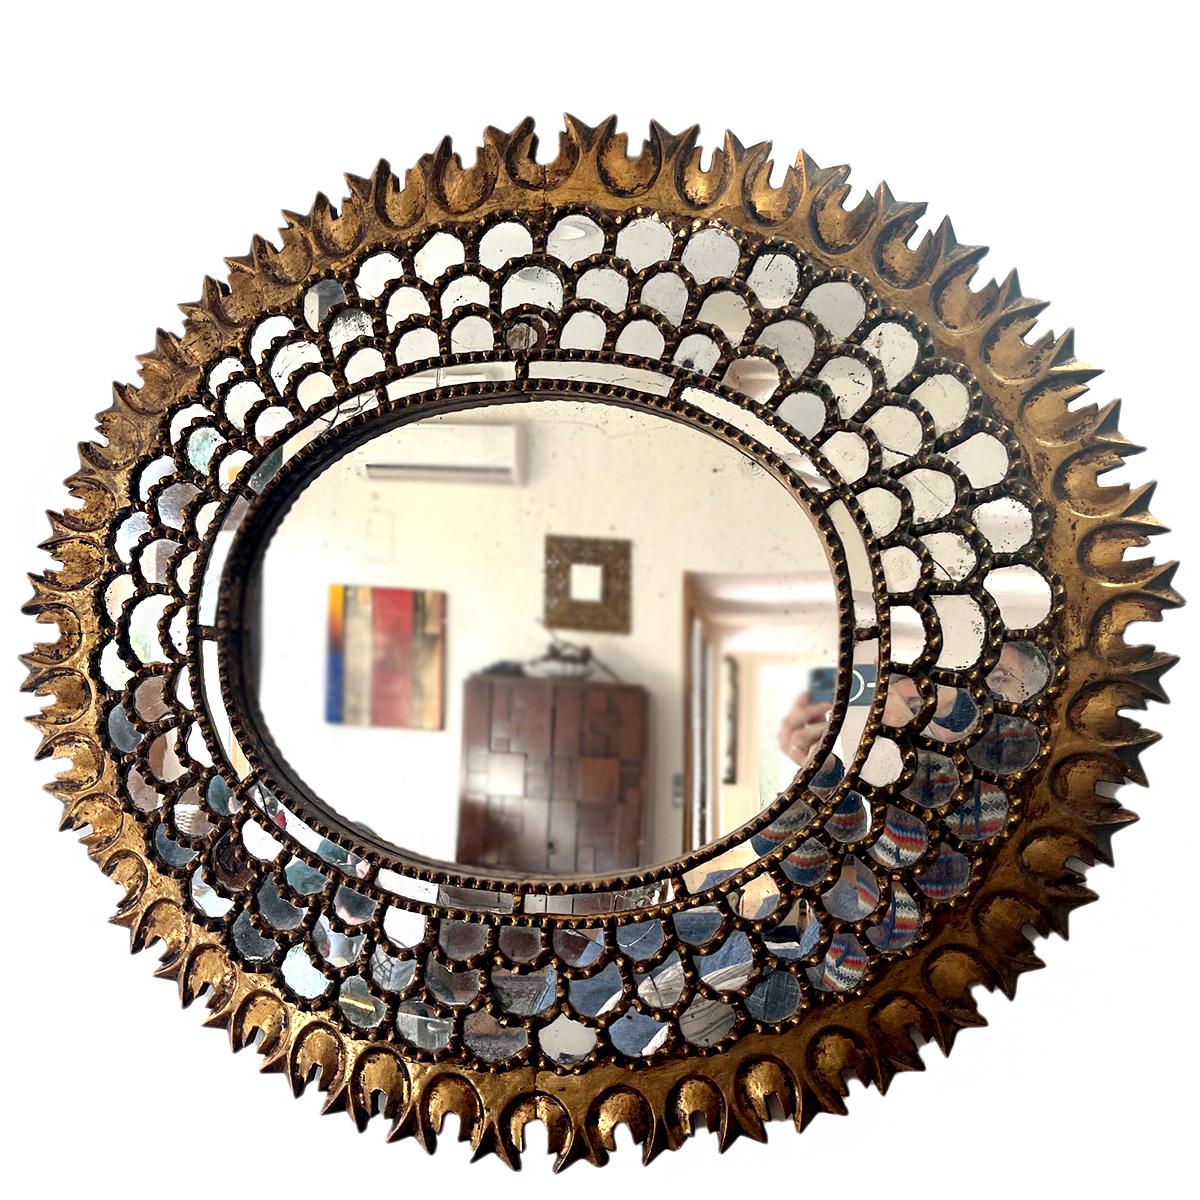  A large oval circa 1920's Spanish mirror with mirror insets.

Measurements:
Height: 37